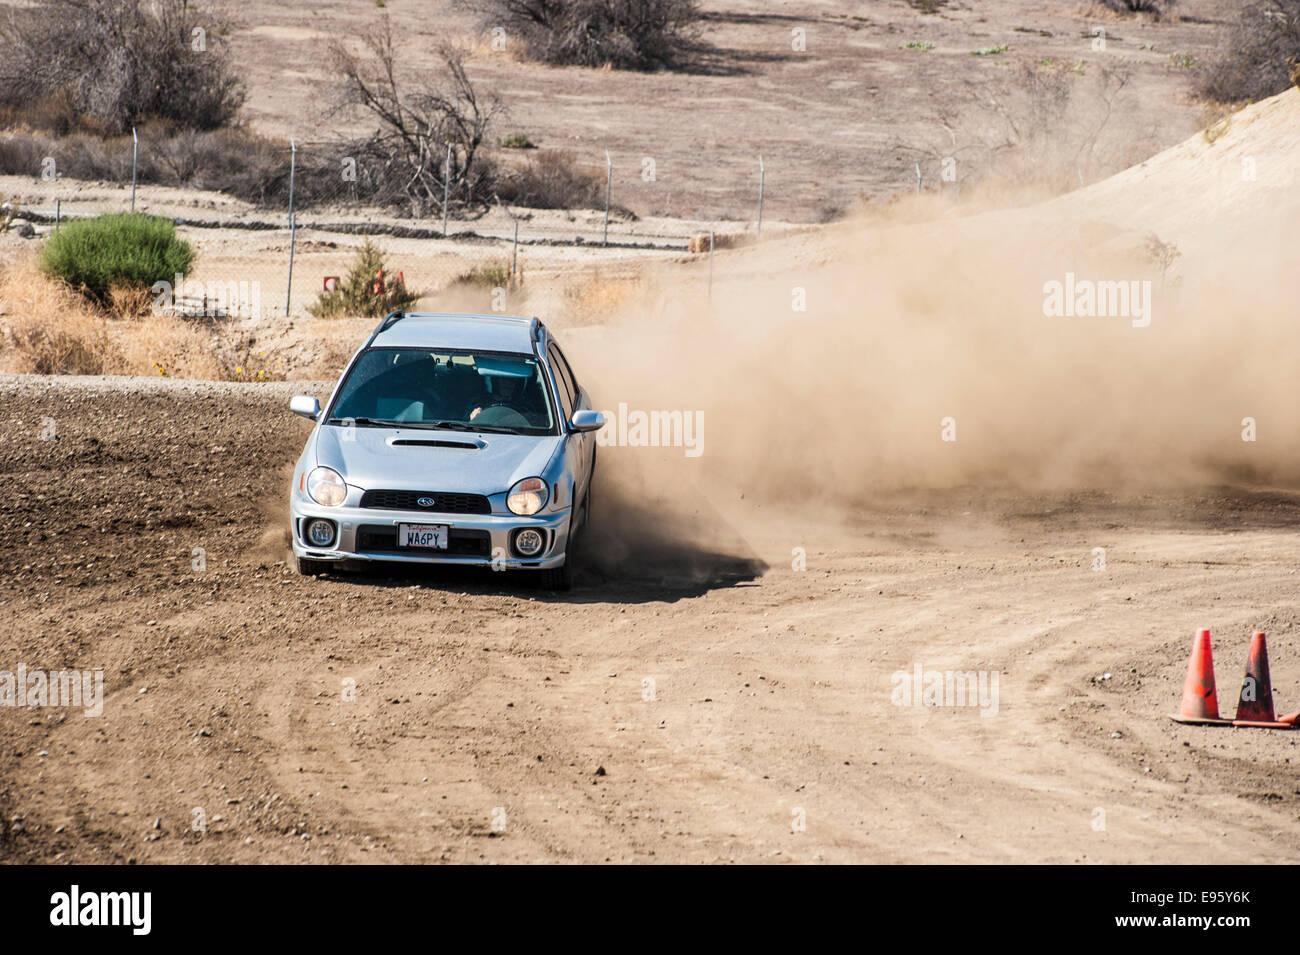 Glen Helen, California, USA. 19th Oct, 2014.  Motorsport is a very popular pastime in the USA. RallyCross is the most widespread extreme dirt motorsport. One of many competitions organized by the Sports Car Club of America took place this Sunday on Glen Helen racing course near the San Bernardino Mountains in Southern California. Alla participating vehicles are street legal and the majority of drivers are amateurs. Some drivers are younger than the cars they drive. A lot of noise, dust and adrenaline. Credit:  Henryk Kotowski/Alamy Live News Stock Photo